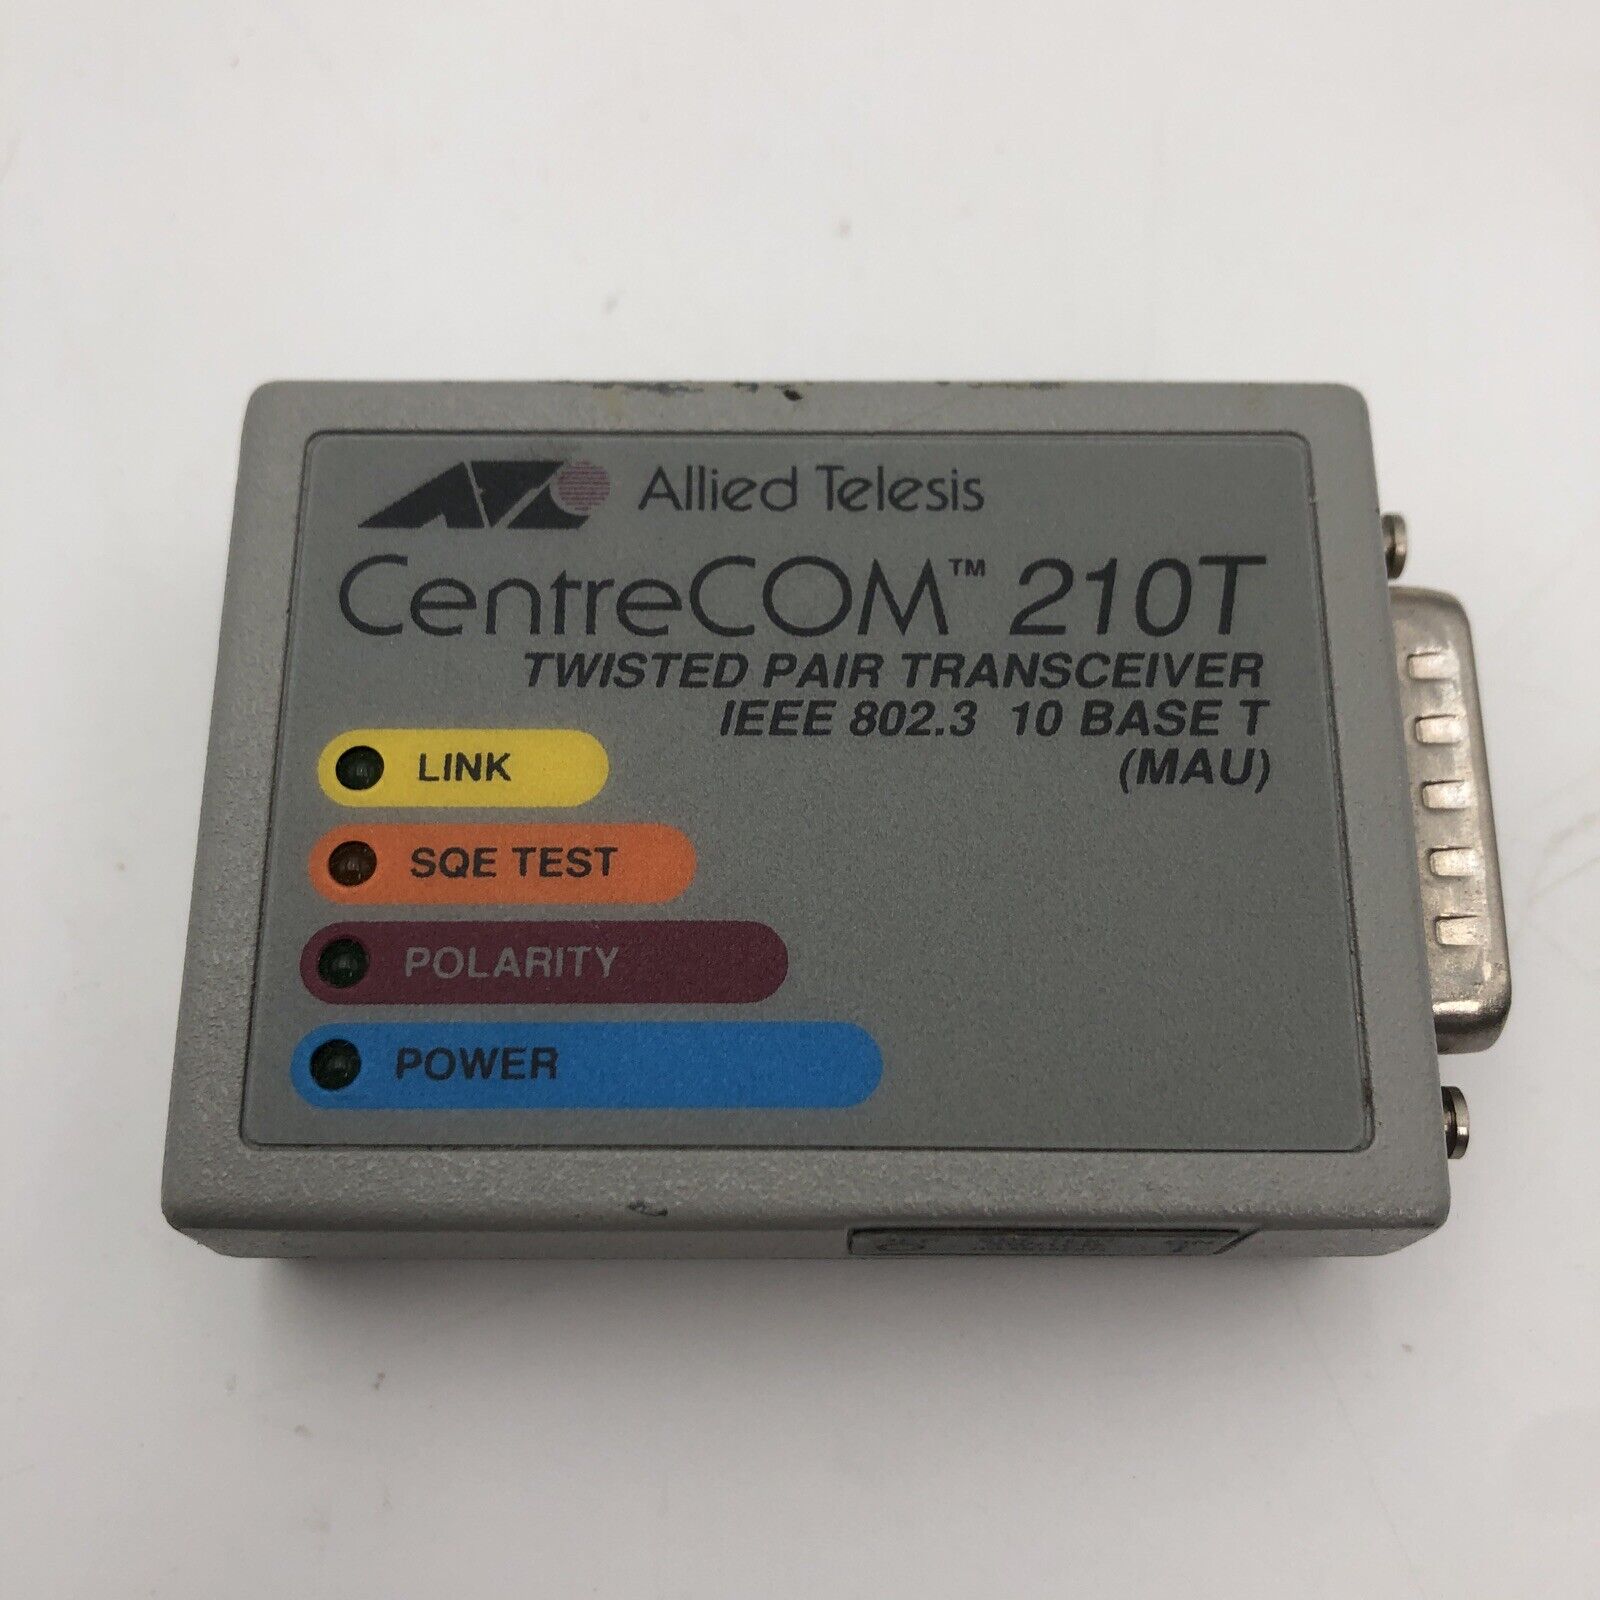 USED CentreCOM AT-210T Transceiver Allied Telesis UNTESTED